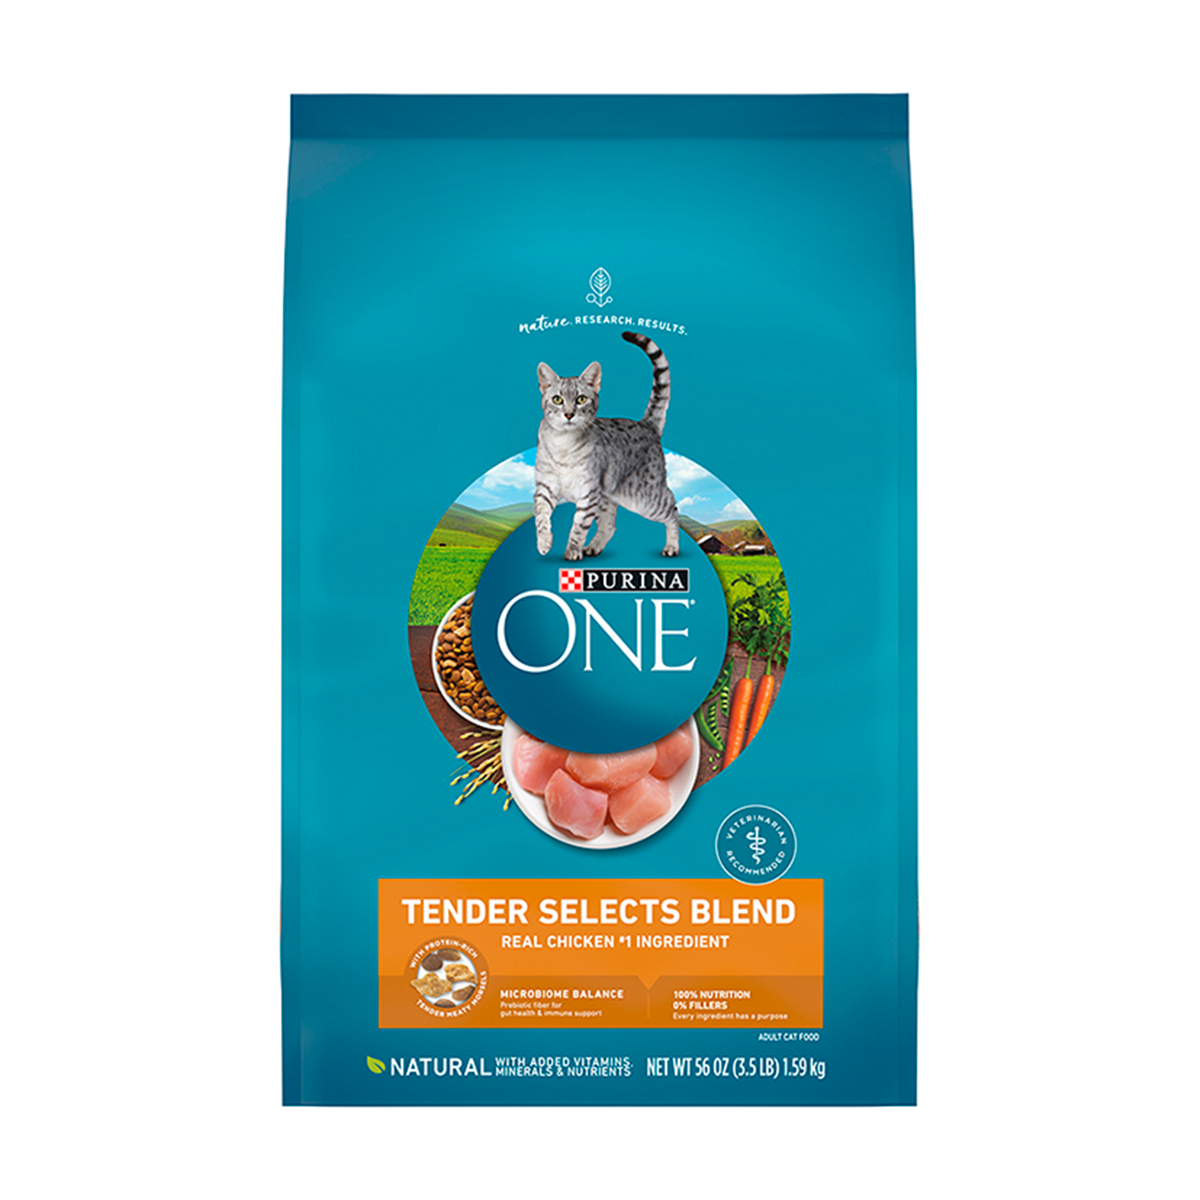 purina-one-dry-cat-tender-selects-blend-chiken-01.png